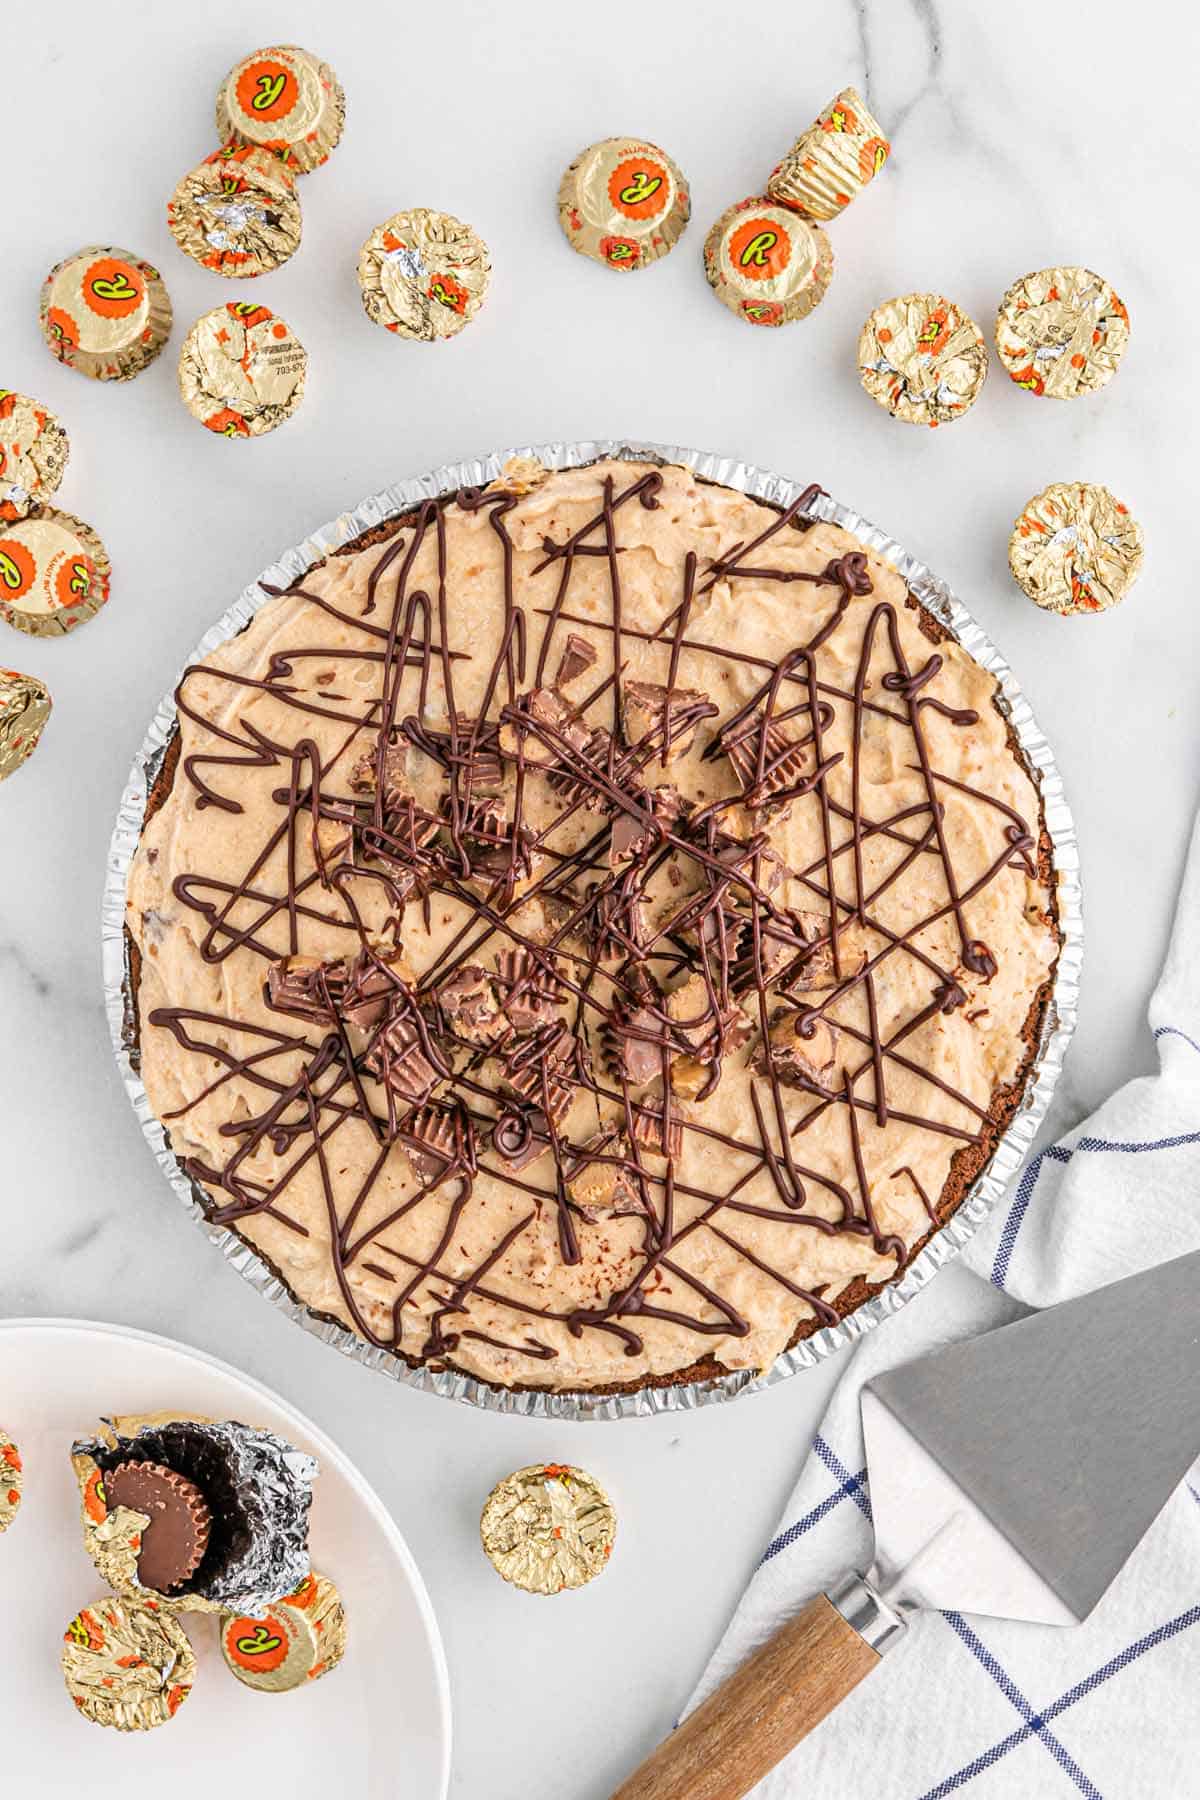 No bake peanut butter pie on the table with wrapped peanut butter cups around it.